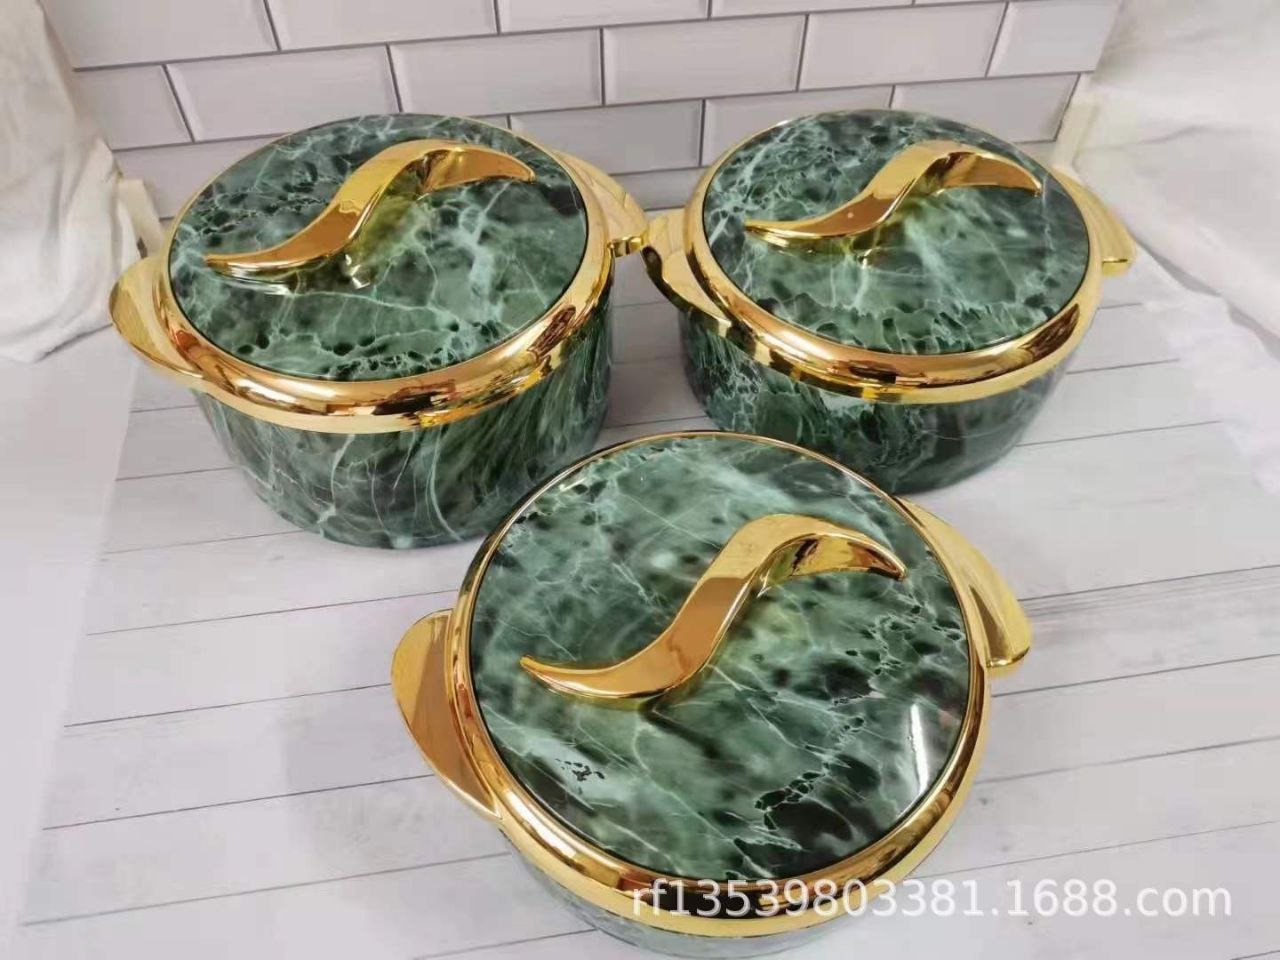 3 Pcs Set Stainless Steel Insulated Food Container.